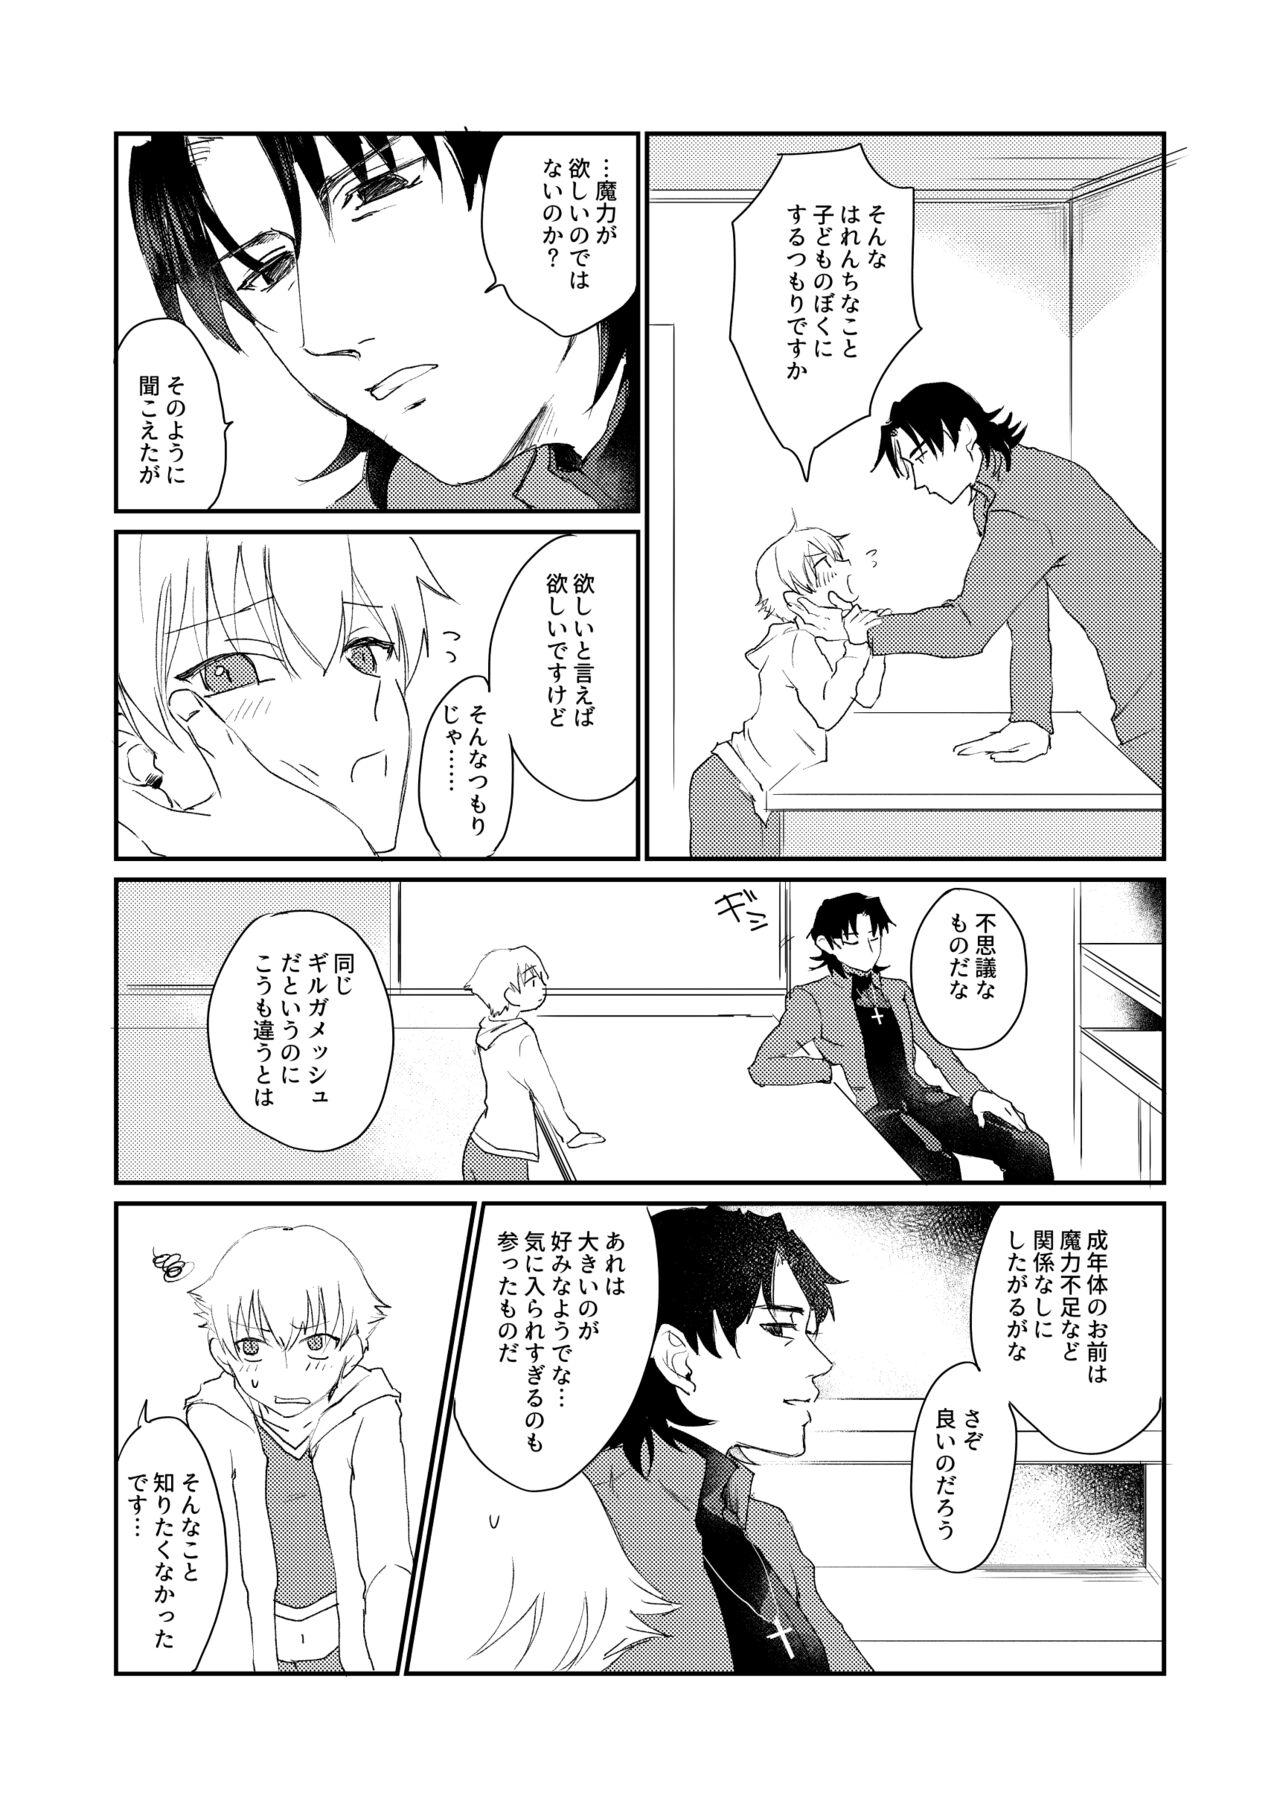 Petite Teenager ARE YOU KIDDING? - Fate zero Studs - Page 4